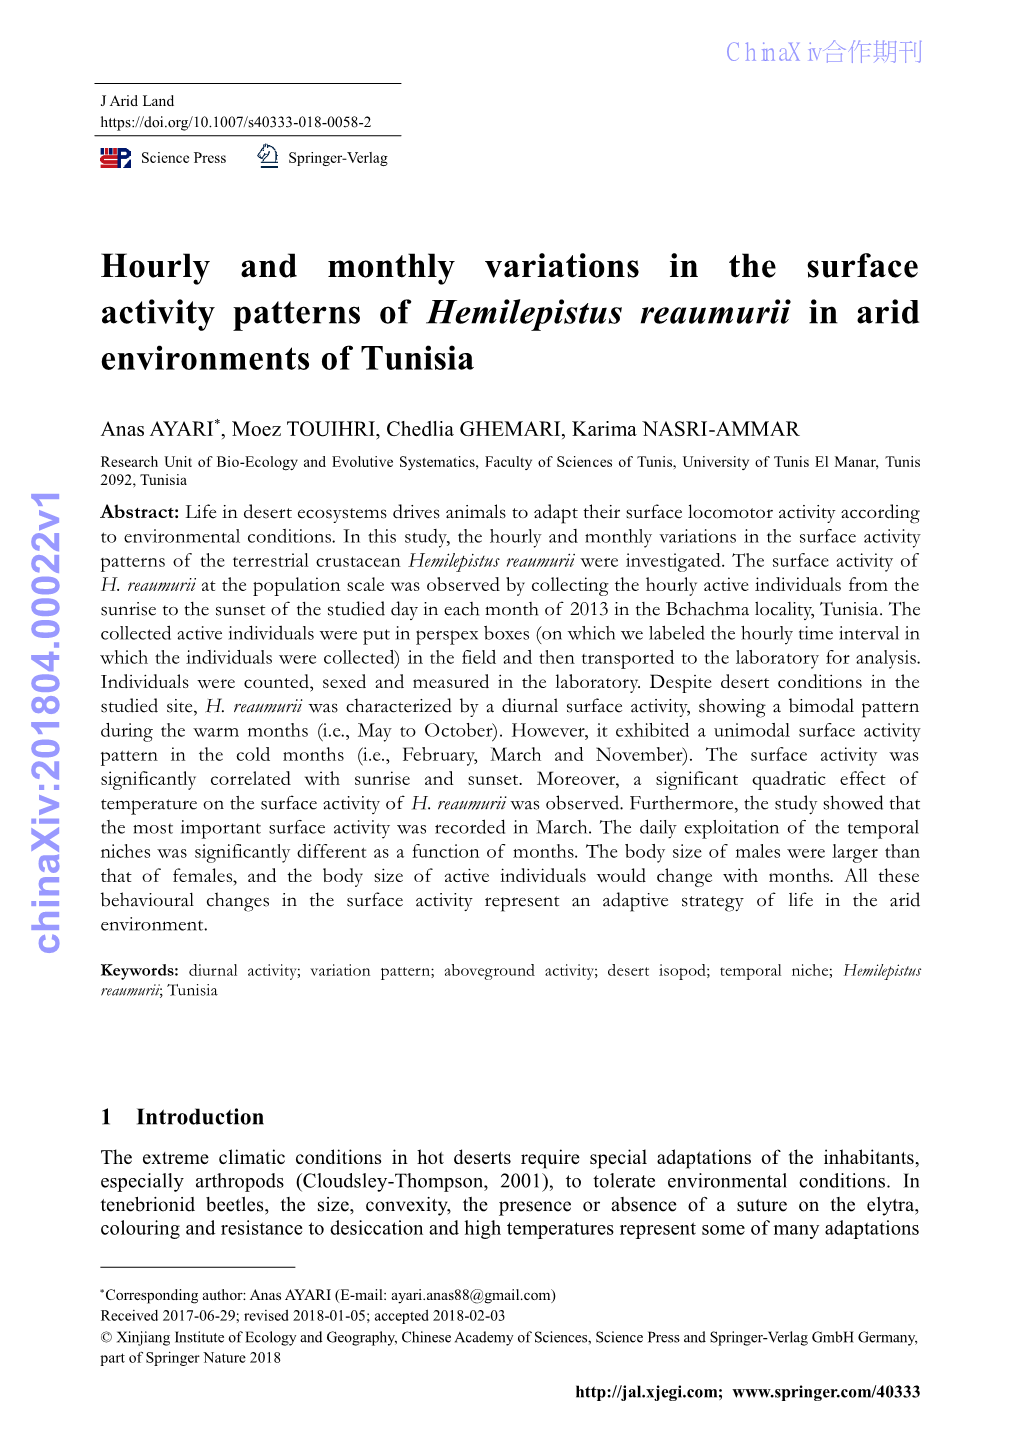 Hourly and Monthly Variations in the Surface Activity Patterns of Hemilepistus Reaumurii in Arid Environments of Tunisia